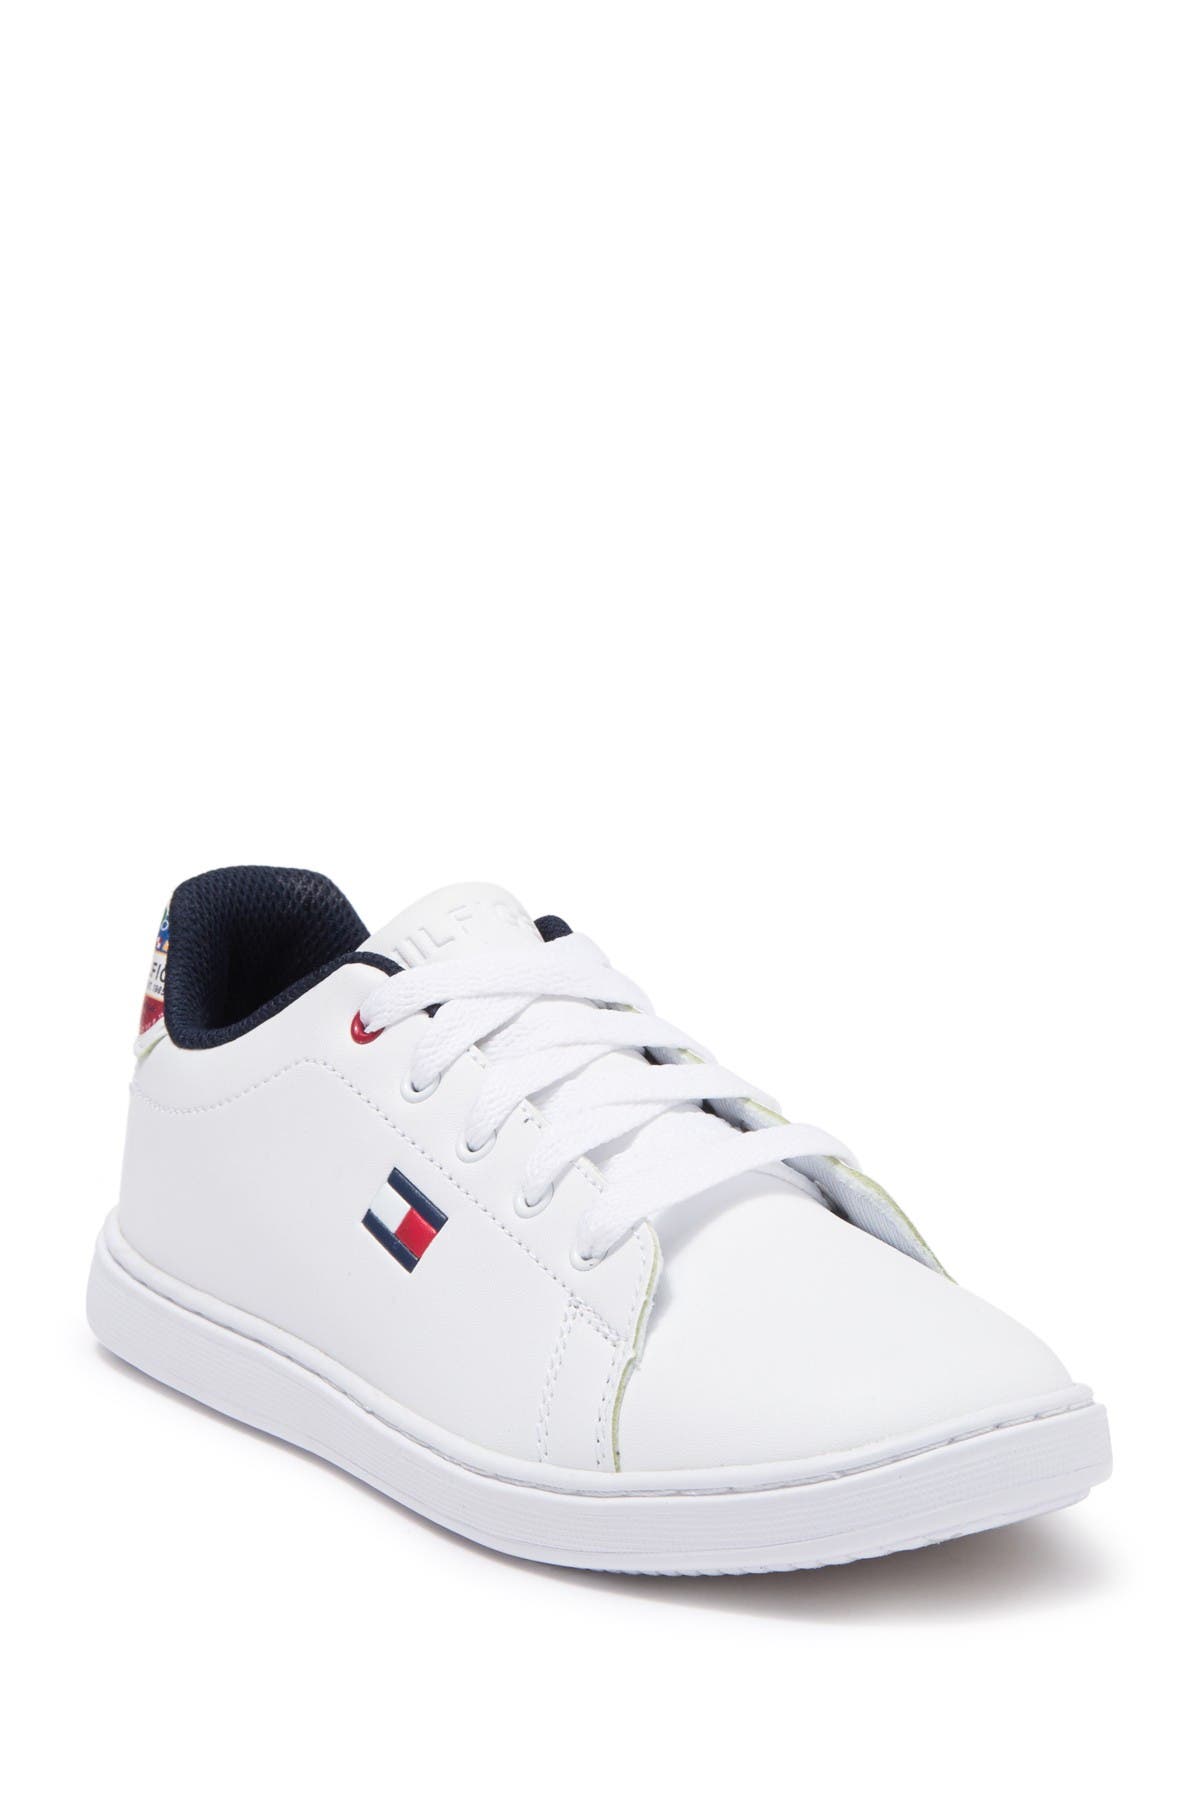 Tommy Hilfiger | Iconic Court Sneaker 